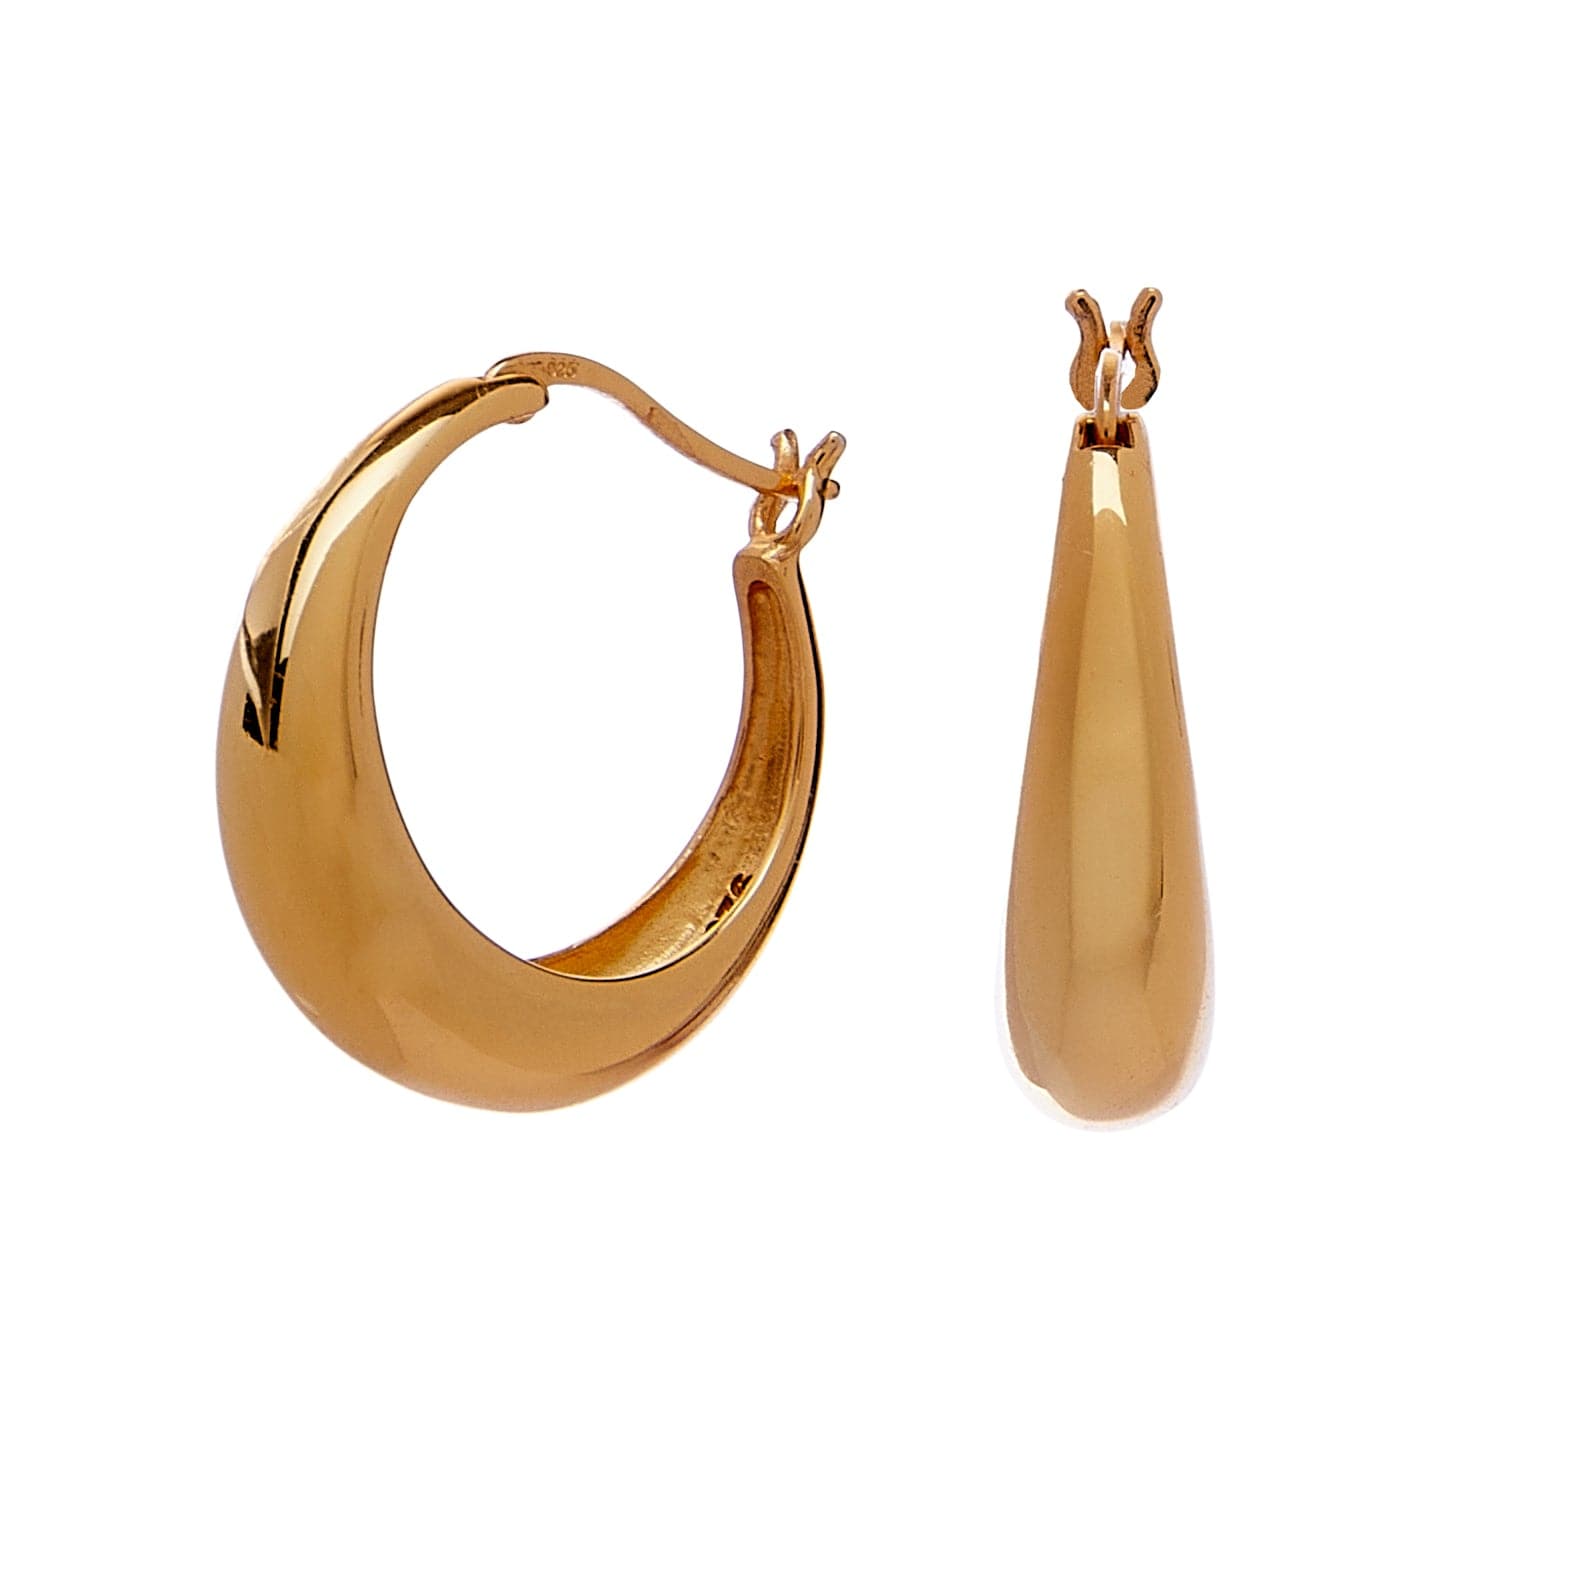 Eloma Boat Shaped Earrings - Recycled Silver Gold Plated